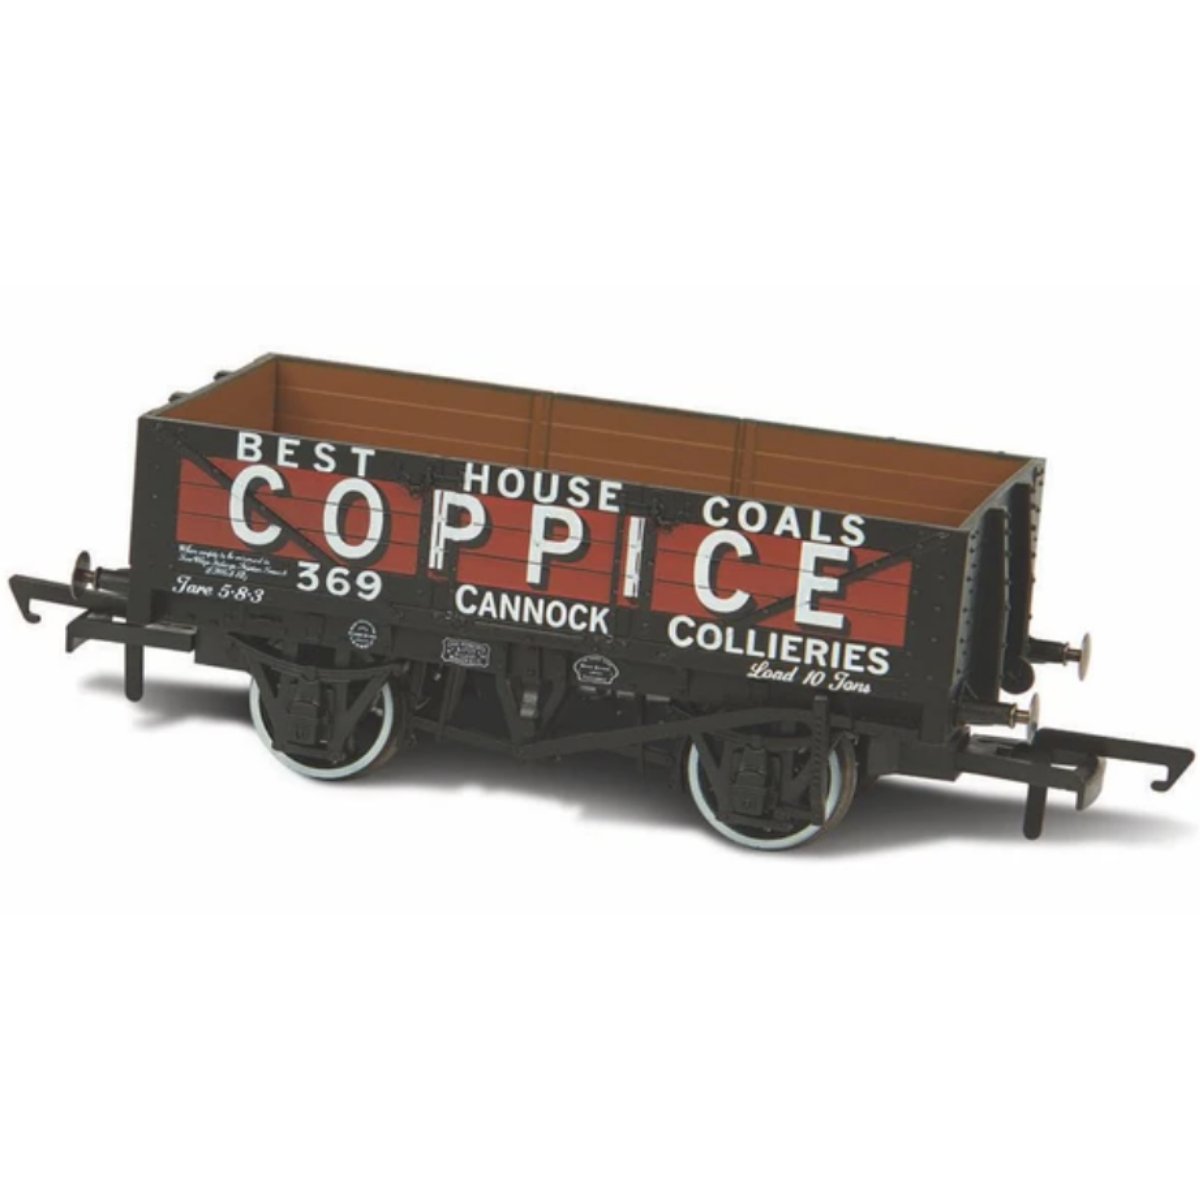 Oxford Rail 5 Plank Mineral Wagon Coppice Cannock Chase - No369 - Phillips Hobbies